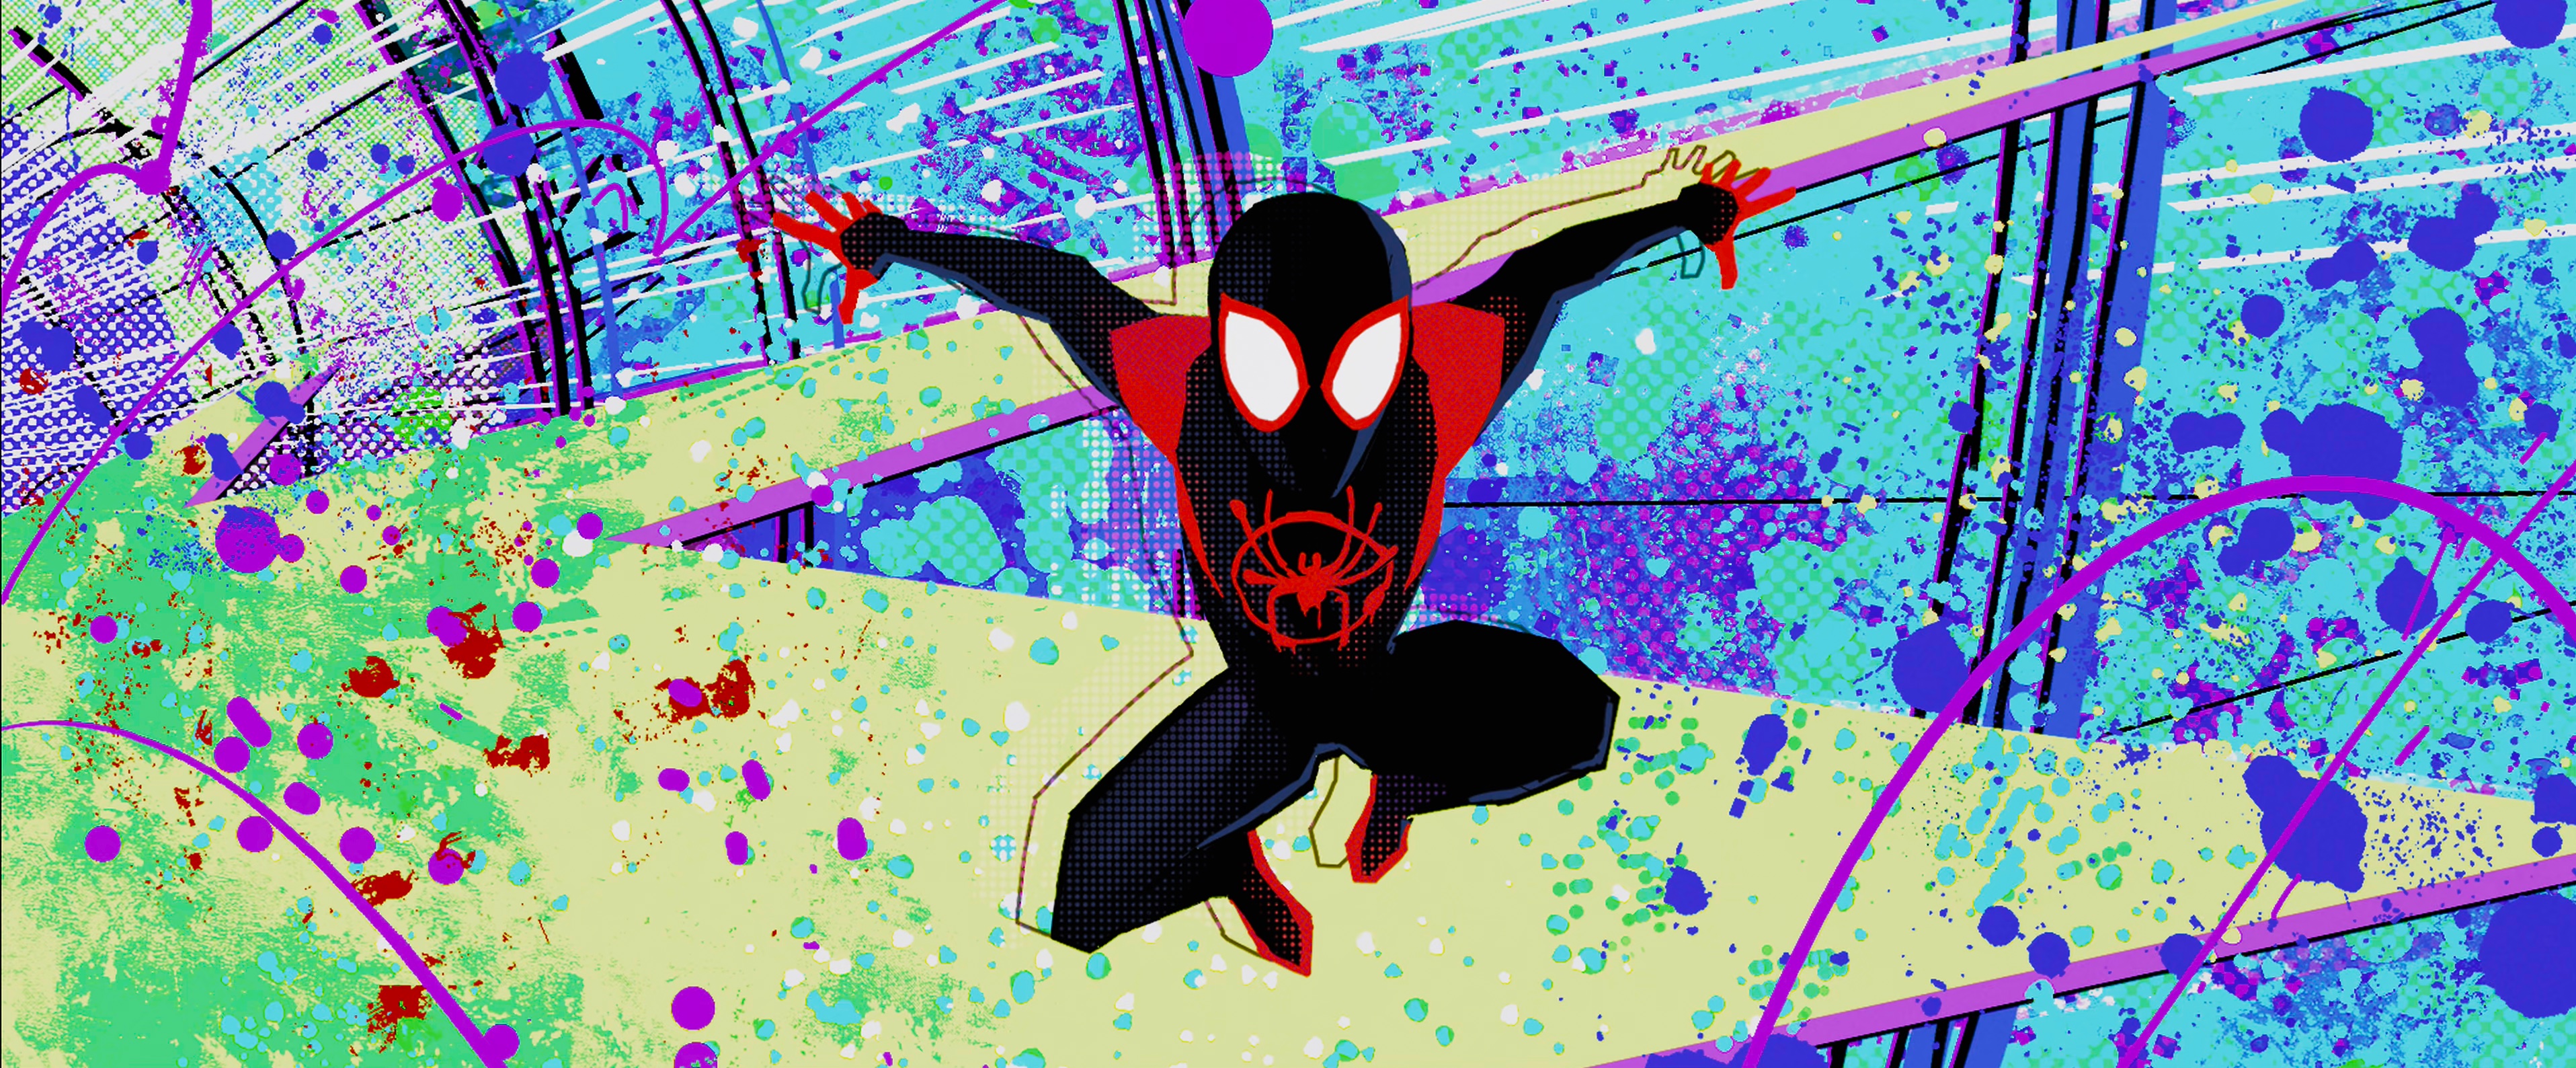 Miles Morales jumps around the dimension portal machine as it explodes in an array of colors and textures in Spider-Man: Into the Spider-Verse